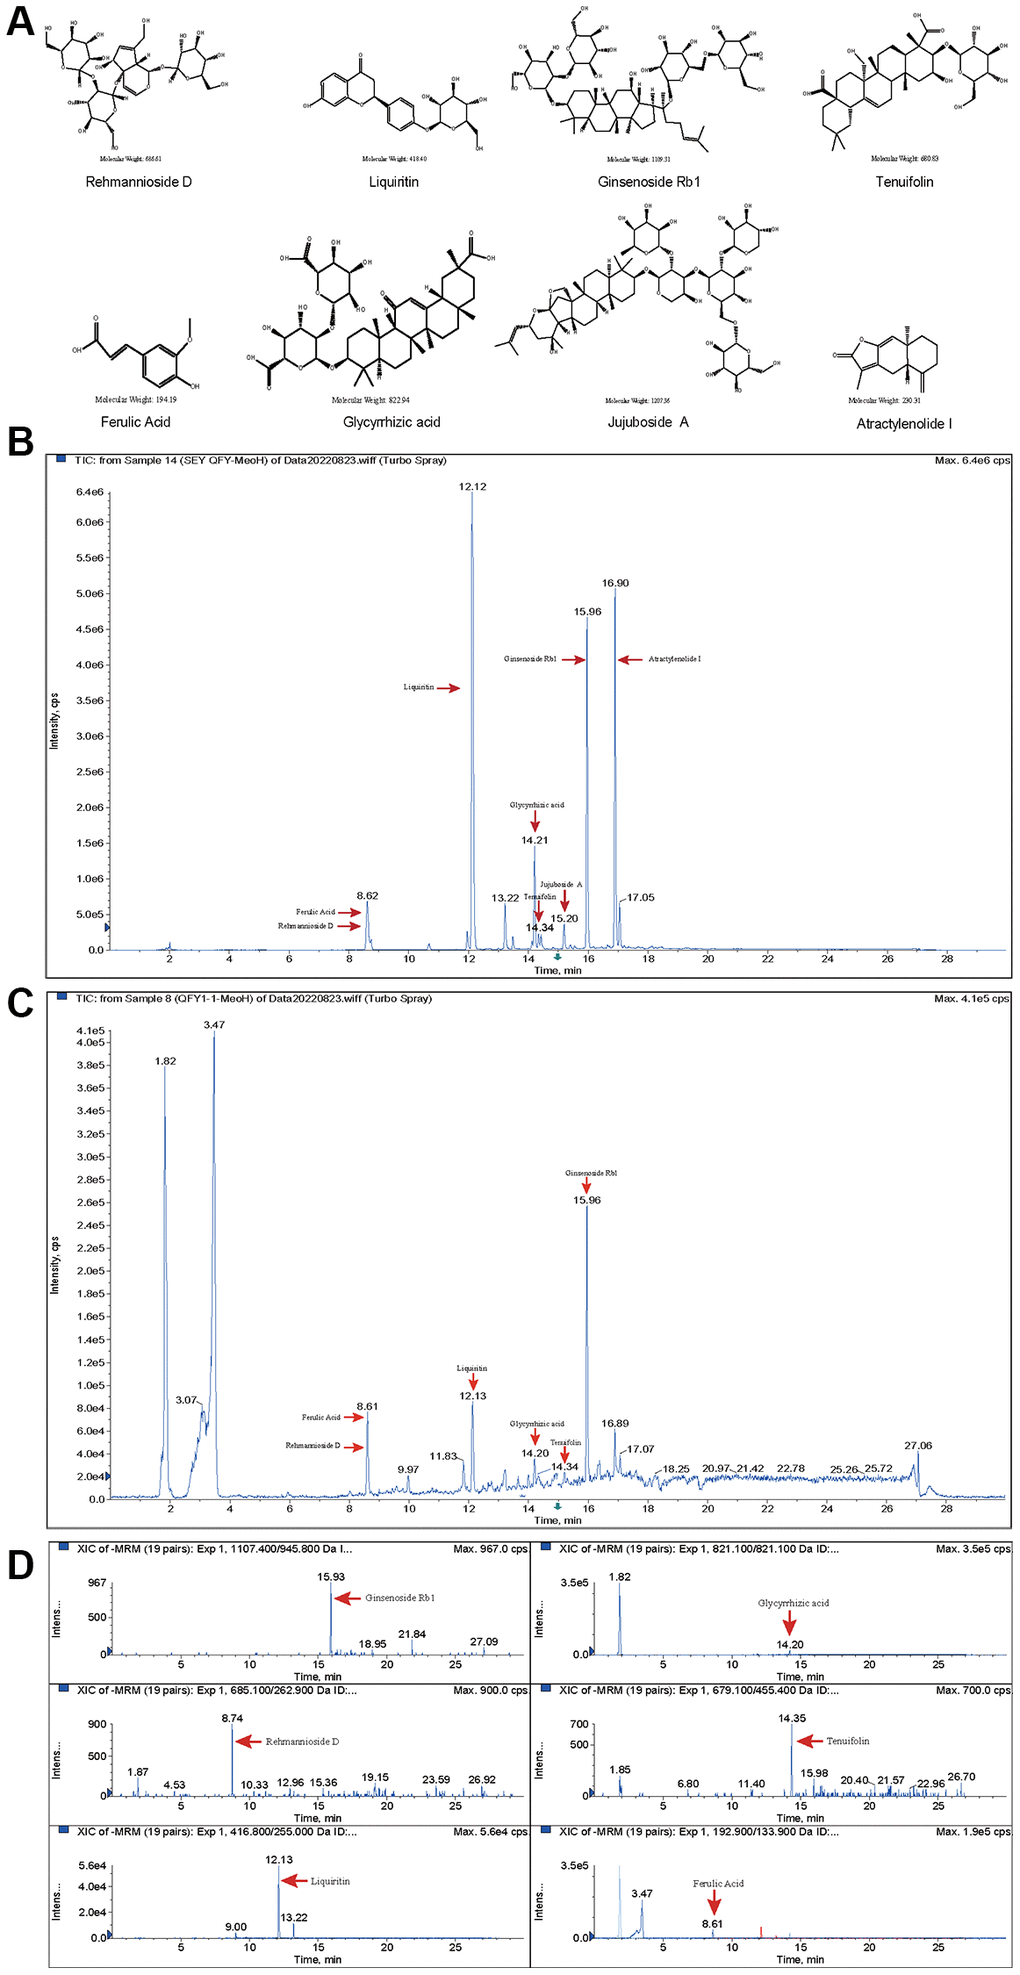 Component identification of freeze-dried QFY powder and drug-containing plasma from rats. (A) Molecular structure formula of the main compounds of QFY. (B) Chromatogram of the main compounds of QFY. (C) Chromatogram of the main compounds of QFY-containing plasma. (D) Mass spectra of the main compounds of QFY-containing plasma.